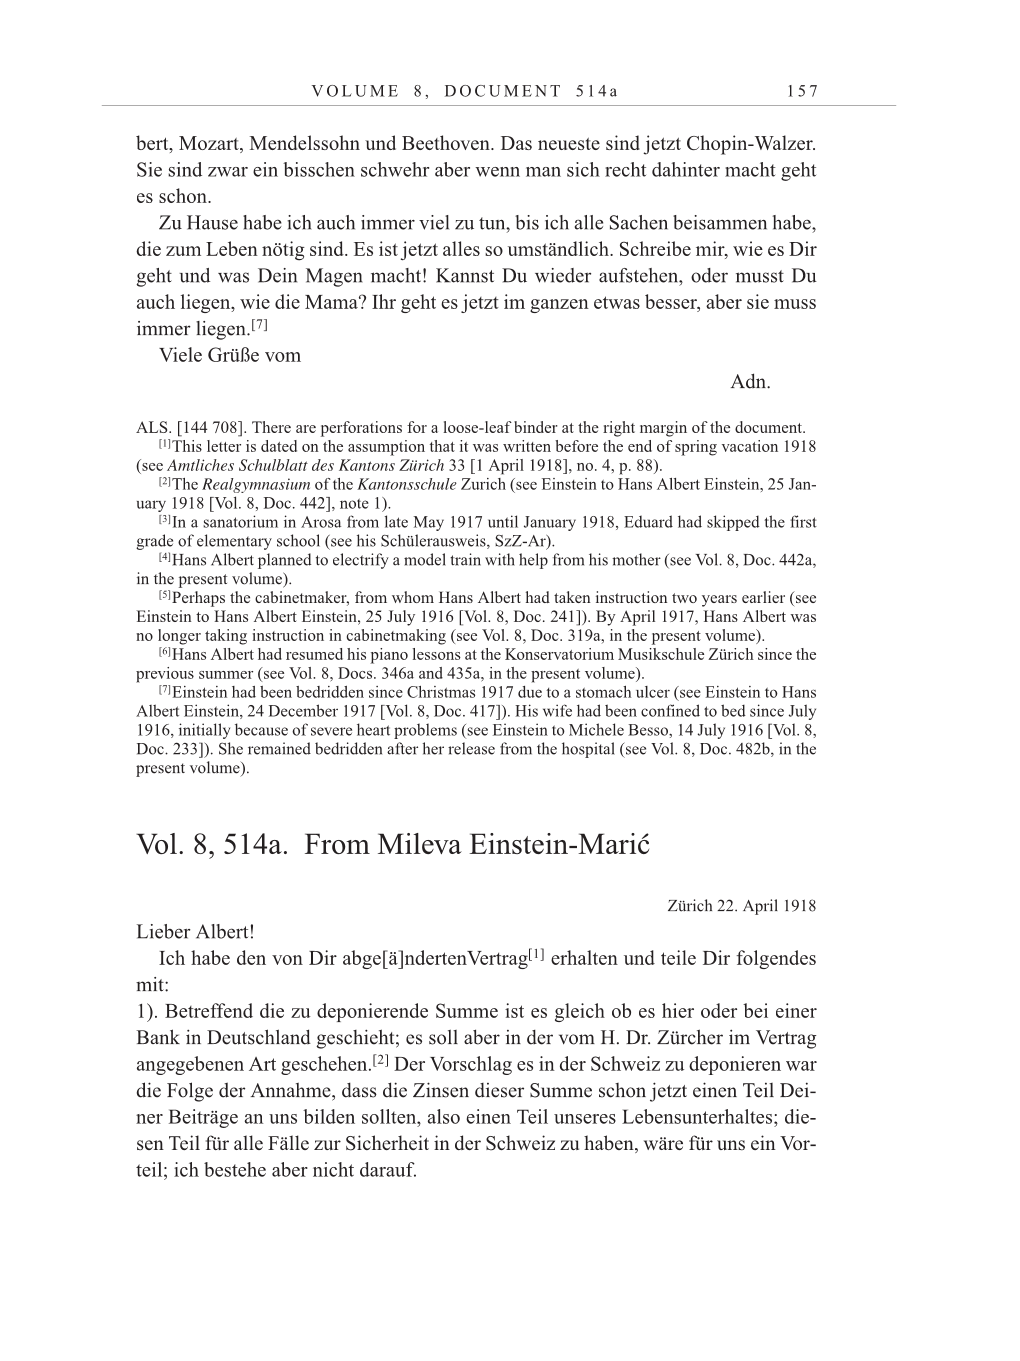 Volume 10: The Berlin Years: Correspondence May-December 1920 / Supplementary Correspondence 1909-1920 page 157